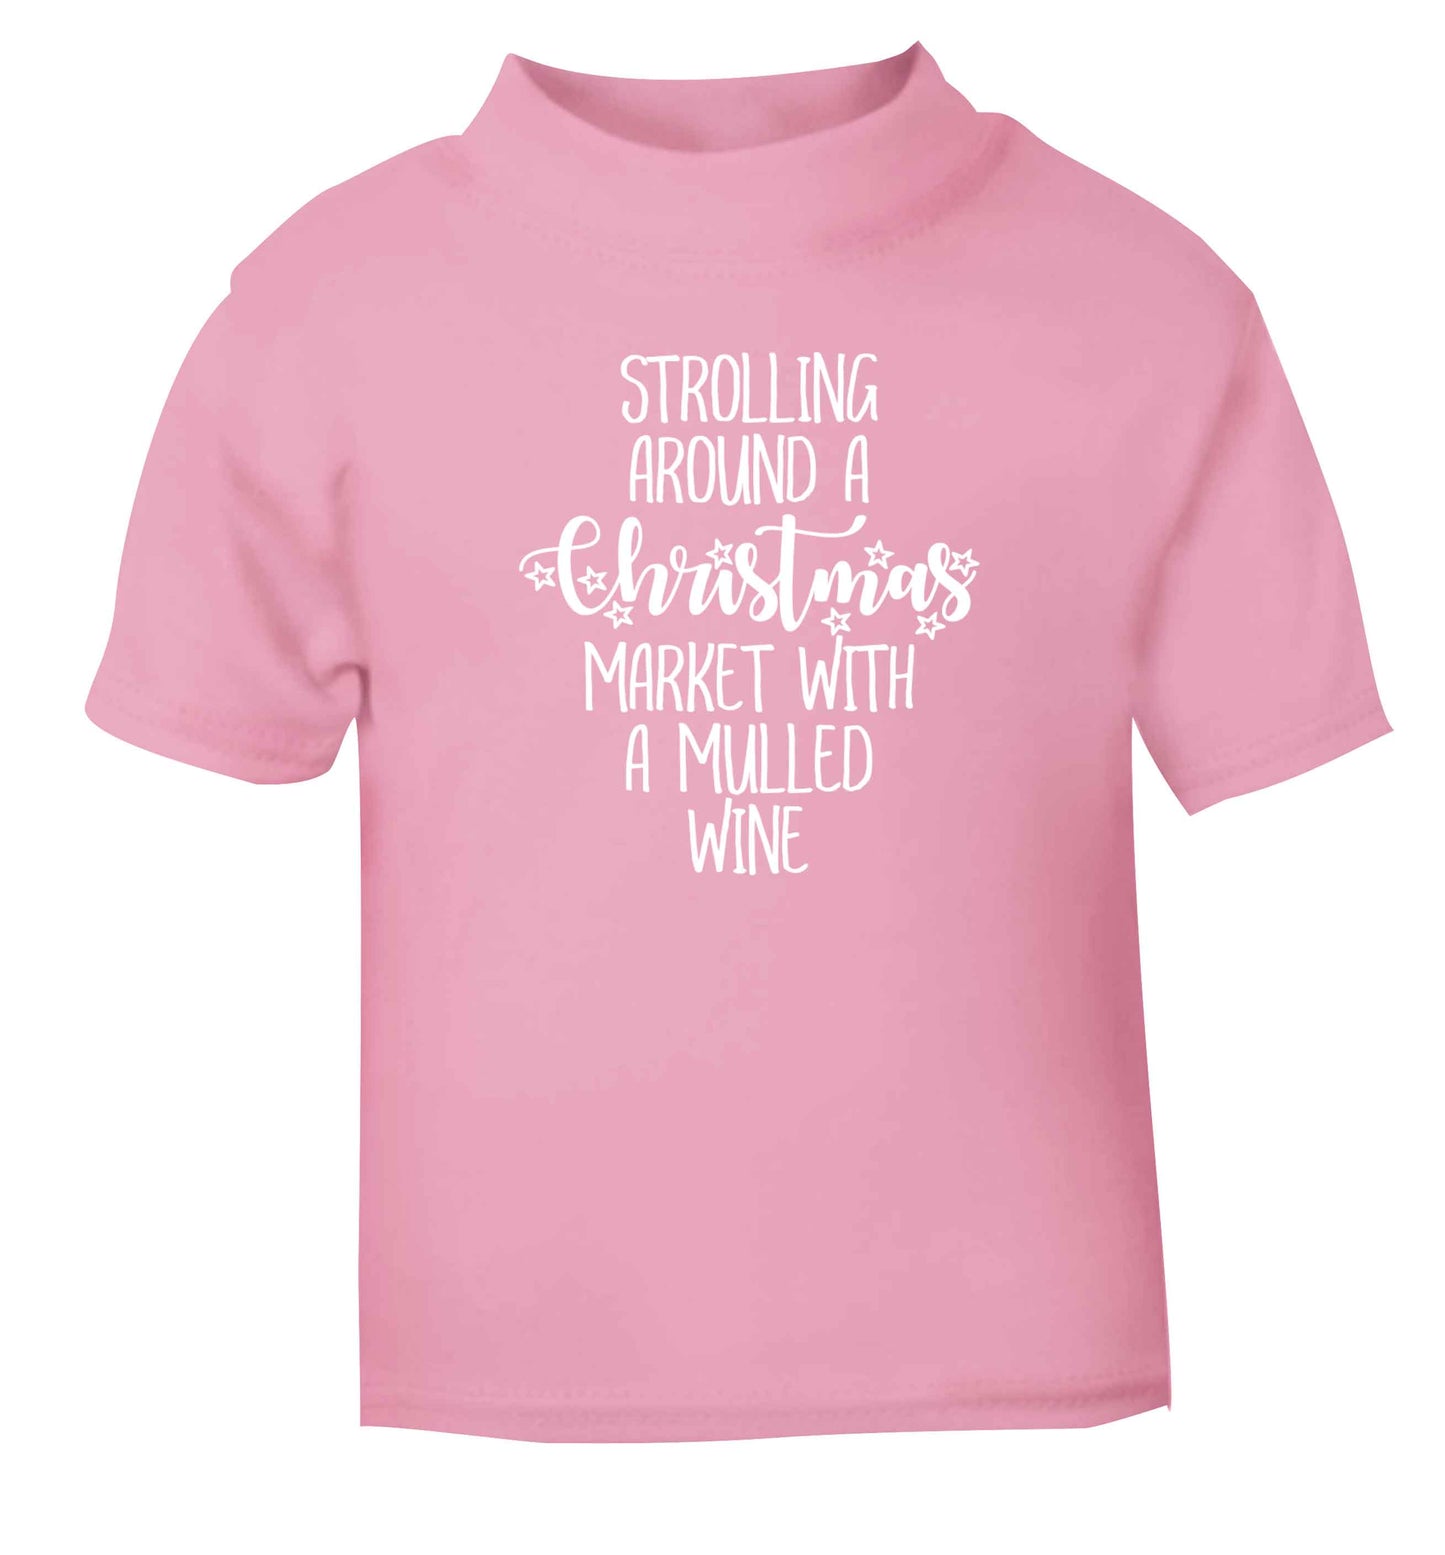 Strolling around a Christmas market with mulled wine light pink Baby Toddler Tshirt 2 Years